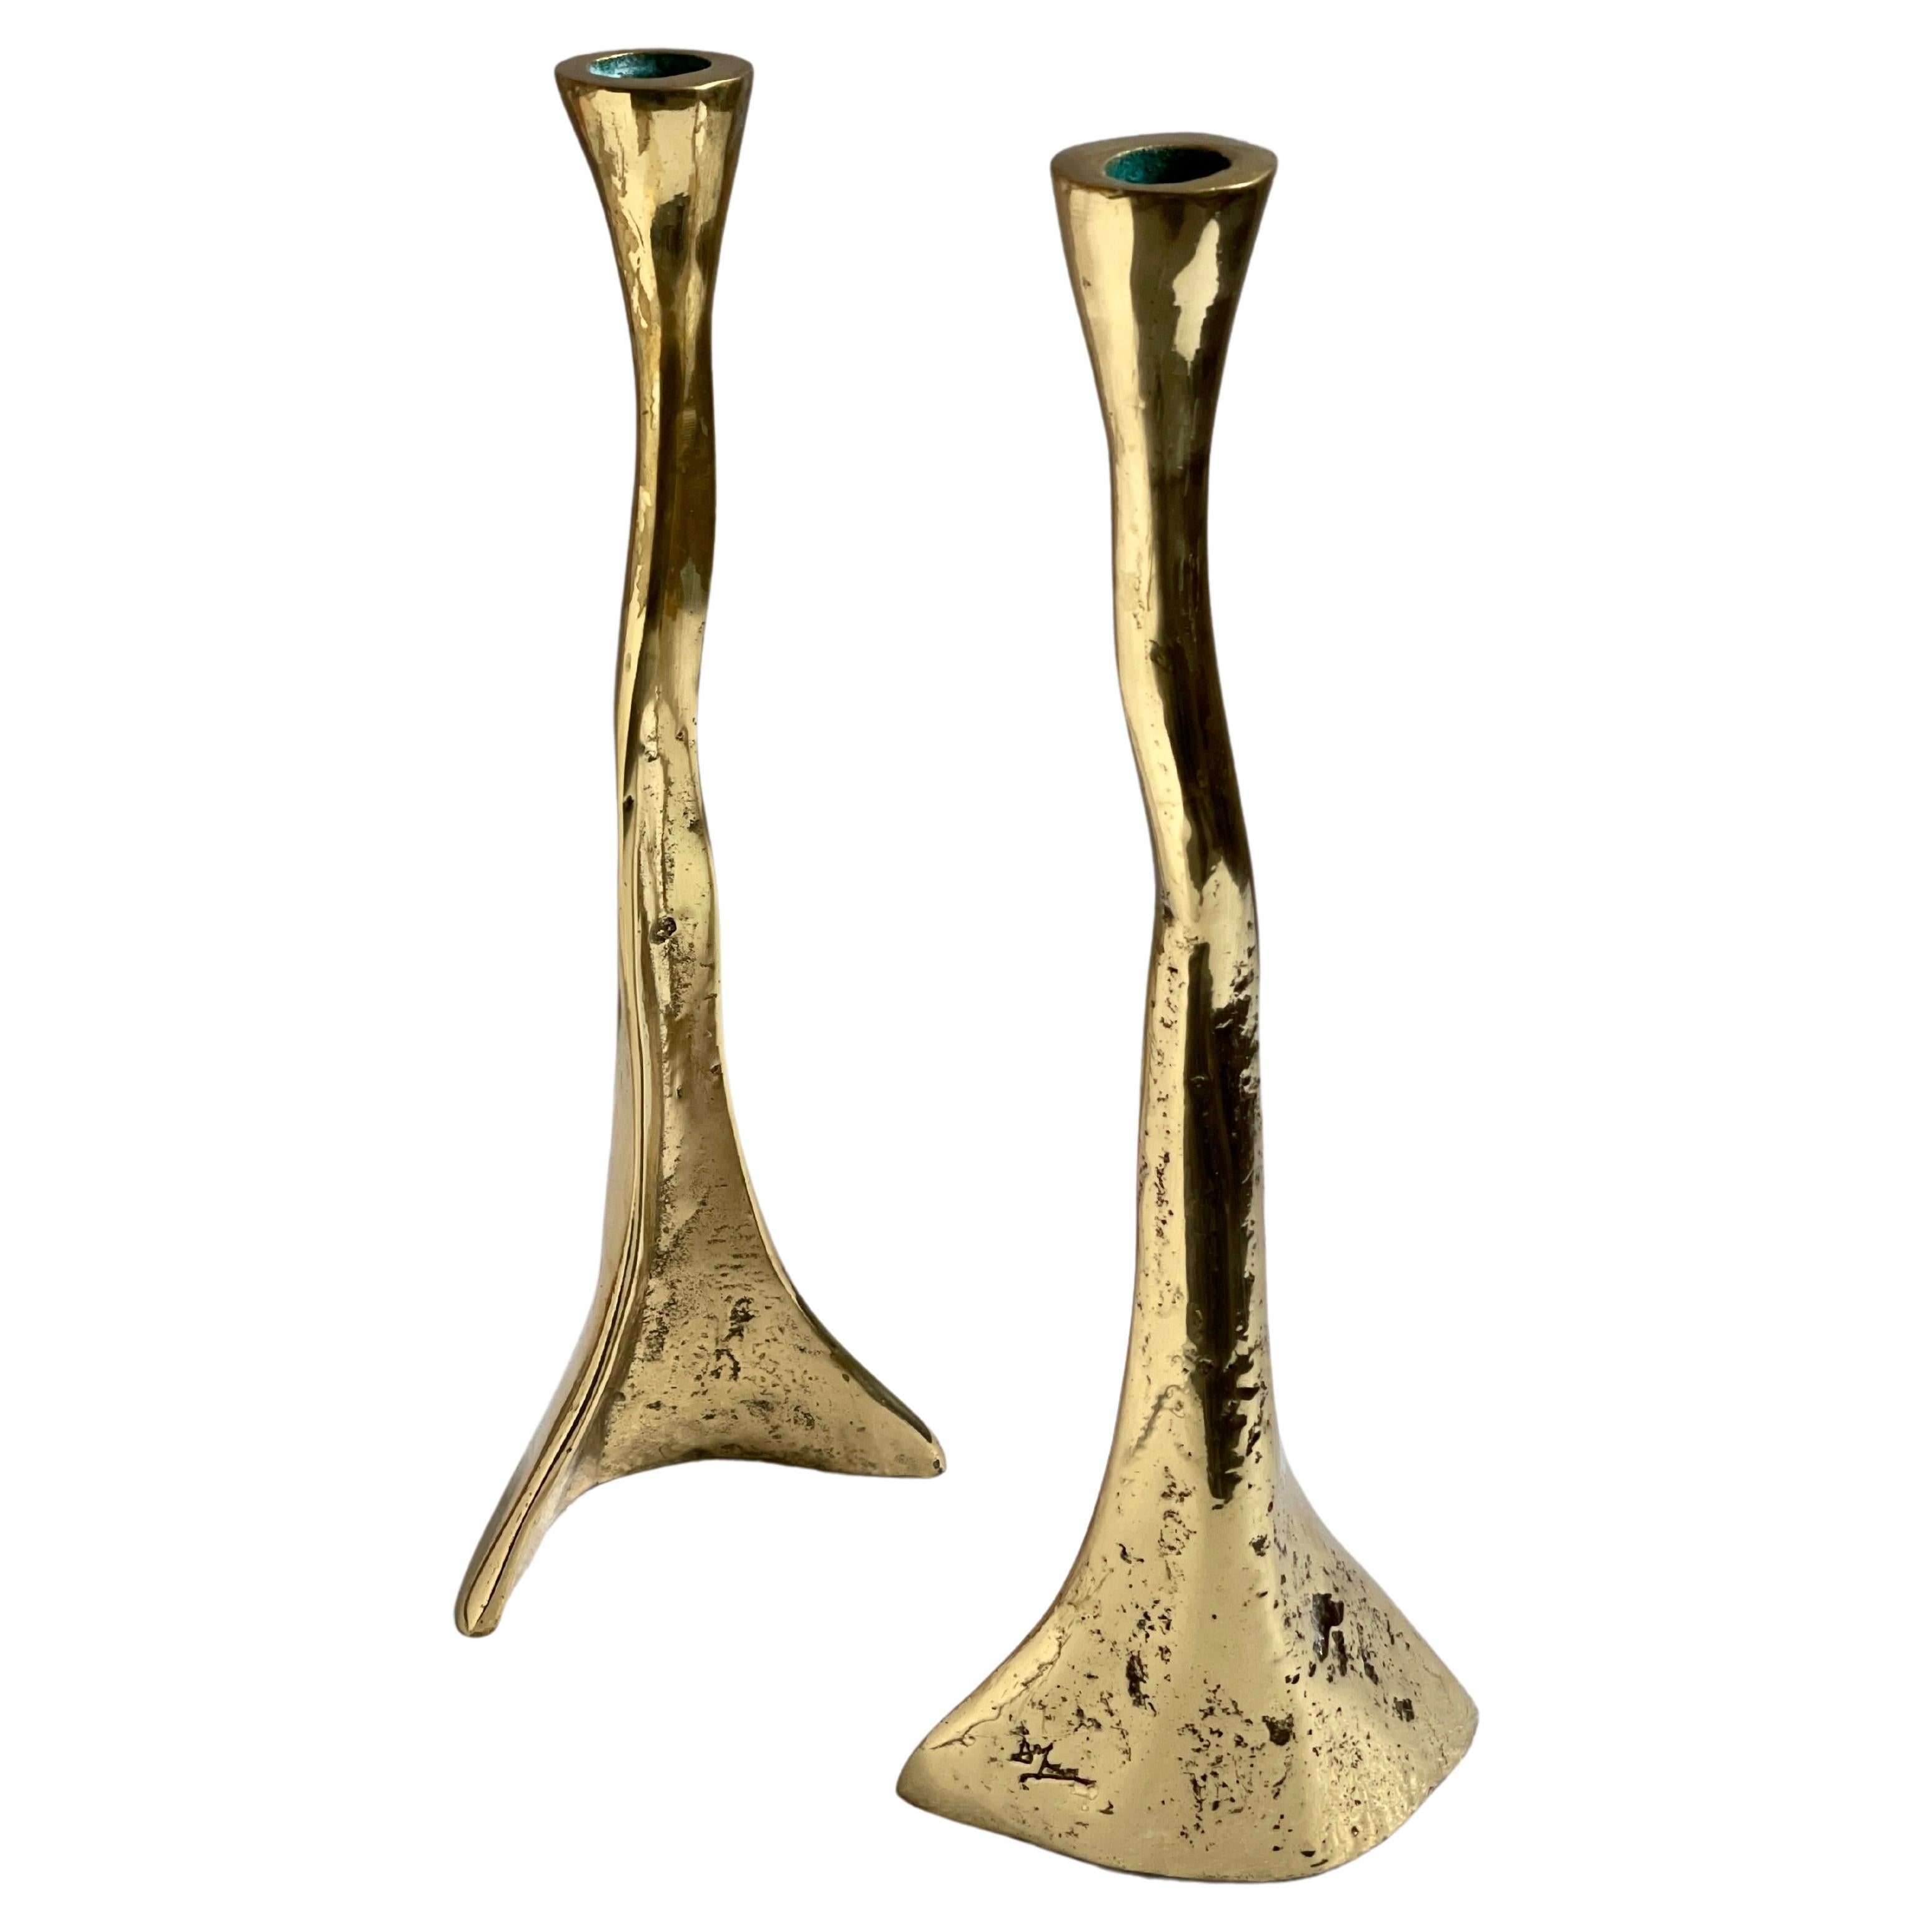 Rare Pair of solid brass Candlesticks. Rustickly cast. Denmark Mid-20th century